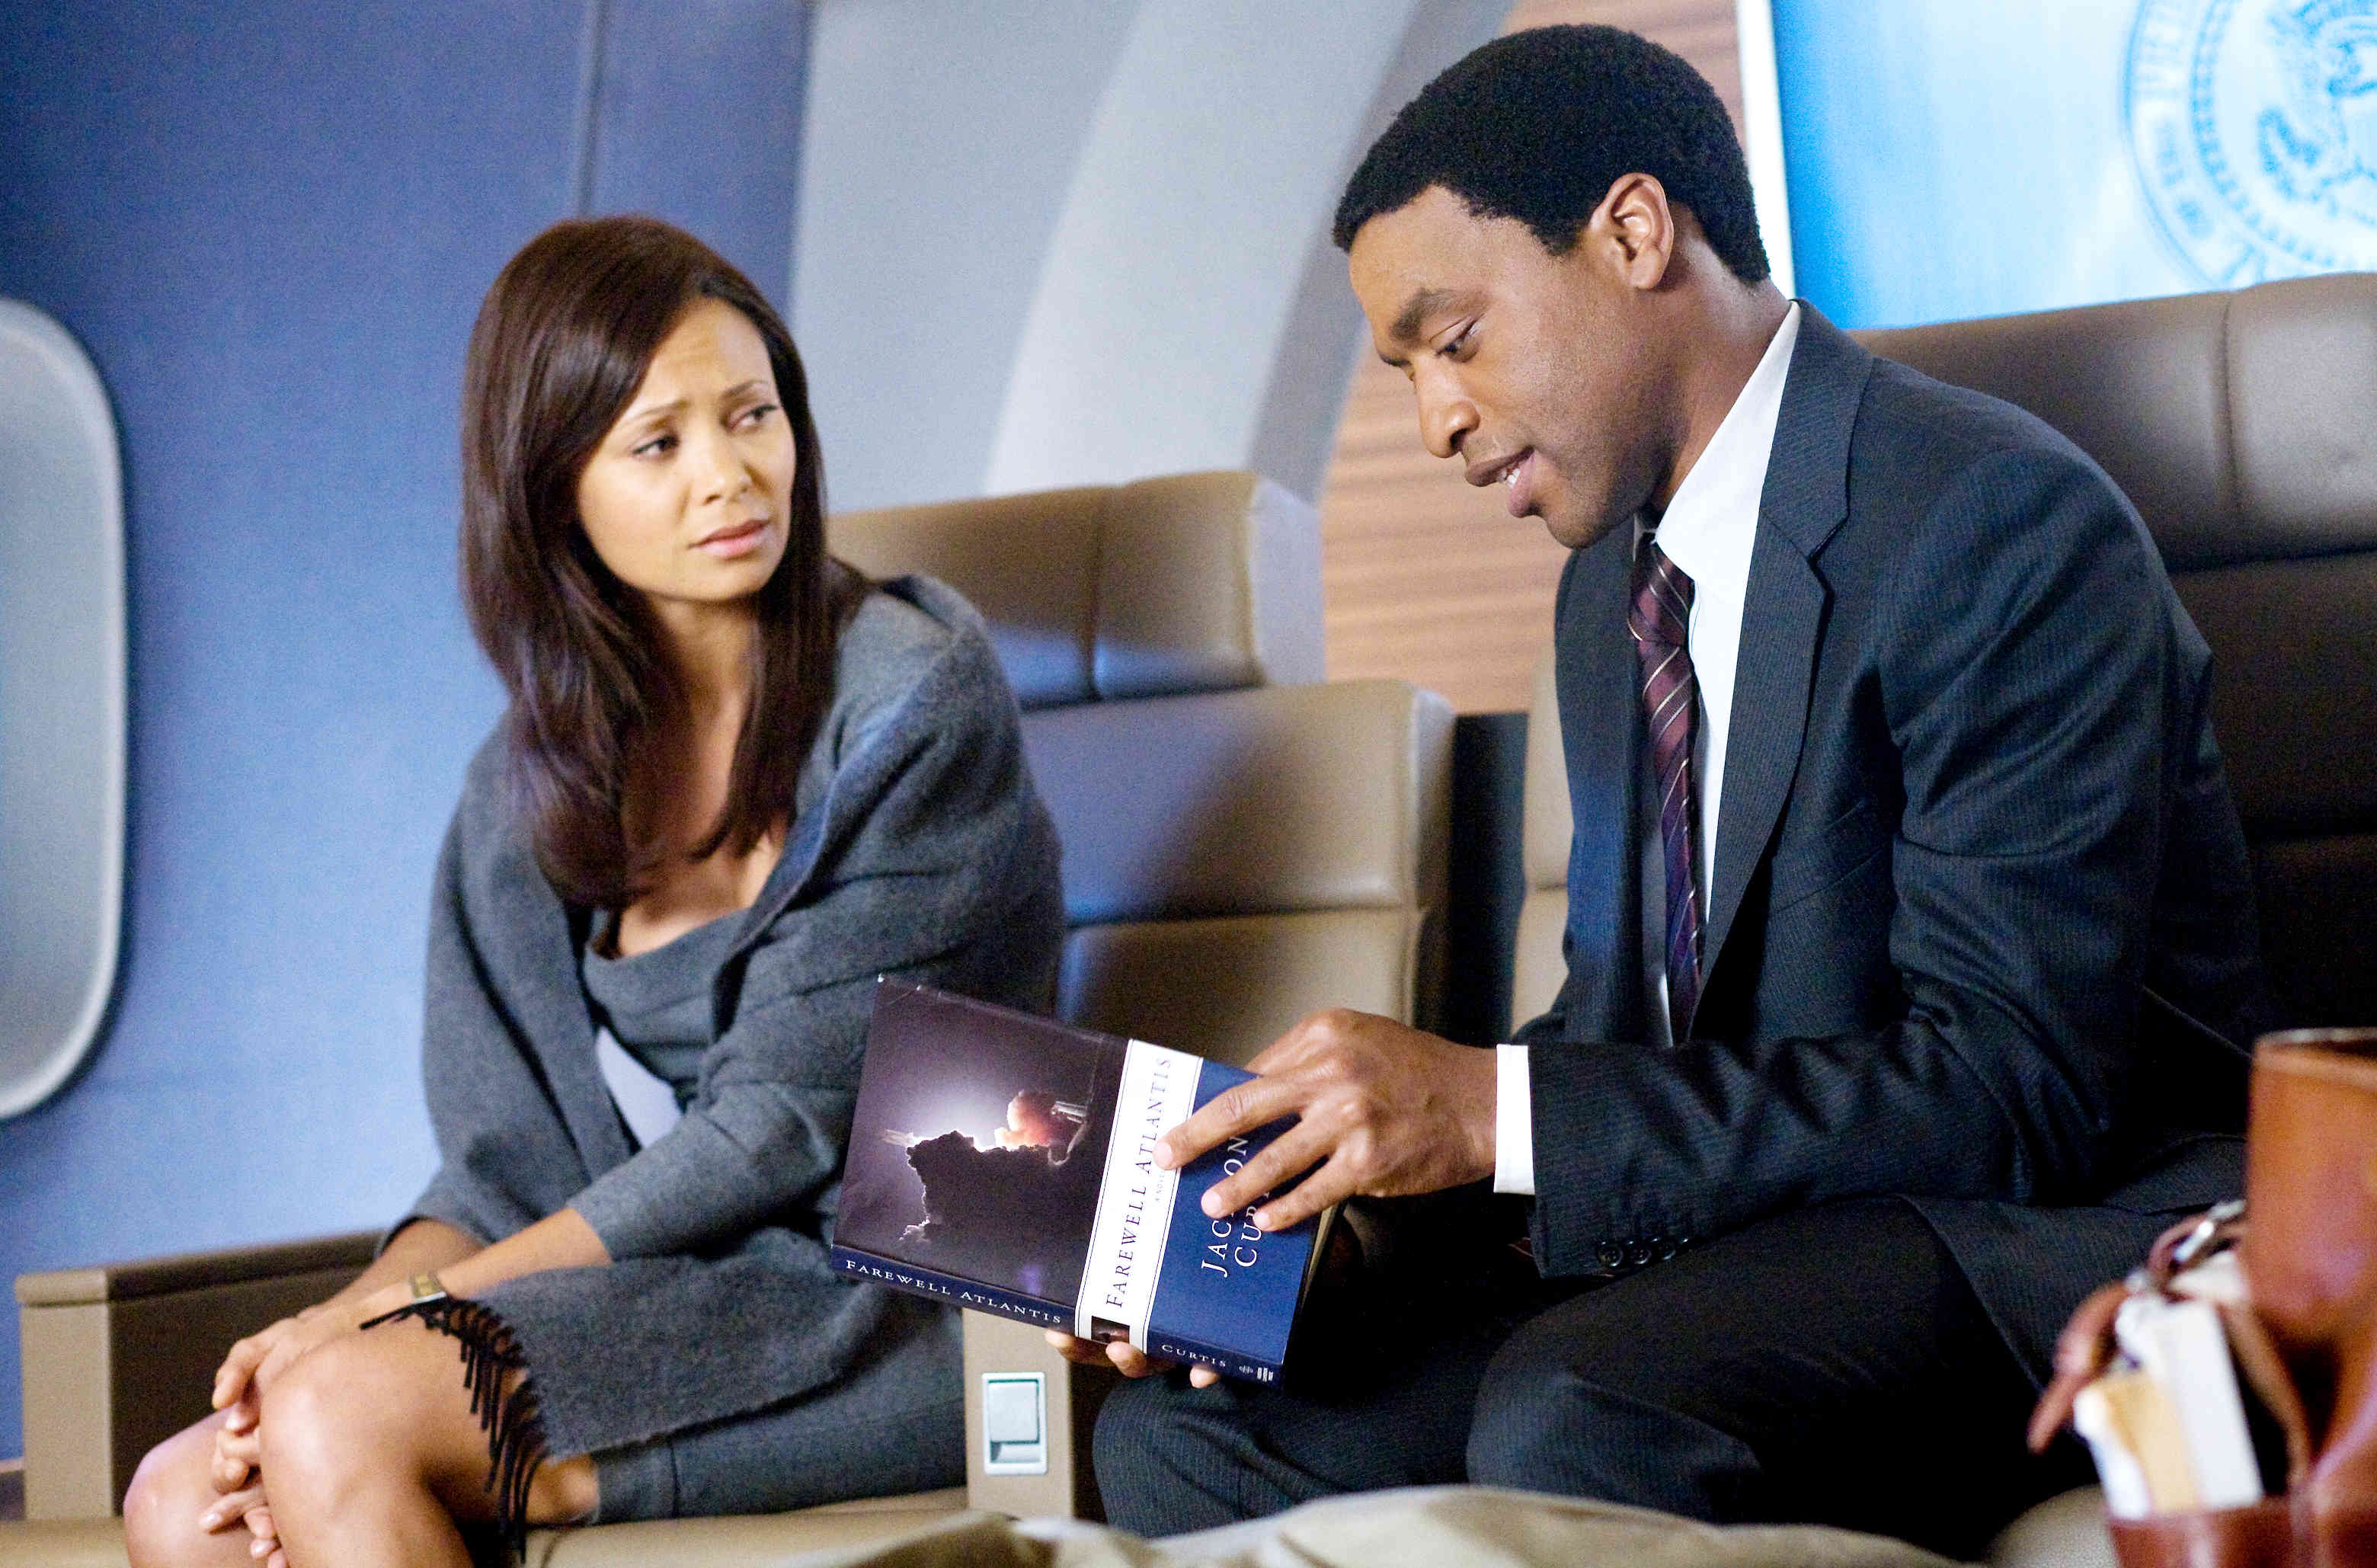 Thandie Newton stars as Laura Wilson and Chiwetel Ejiofor stars as Adrian Helmsley in Columbia Pictures' 2012 (2009)